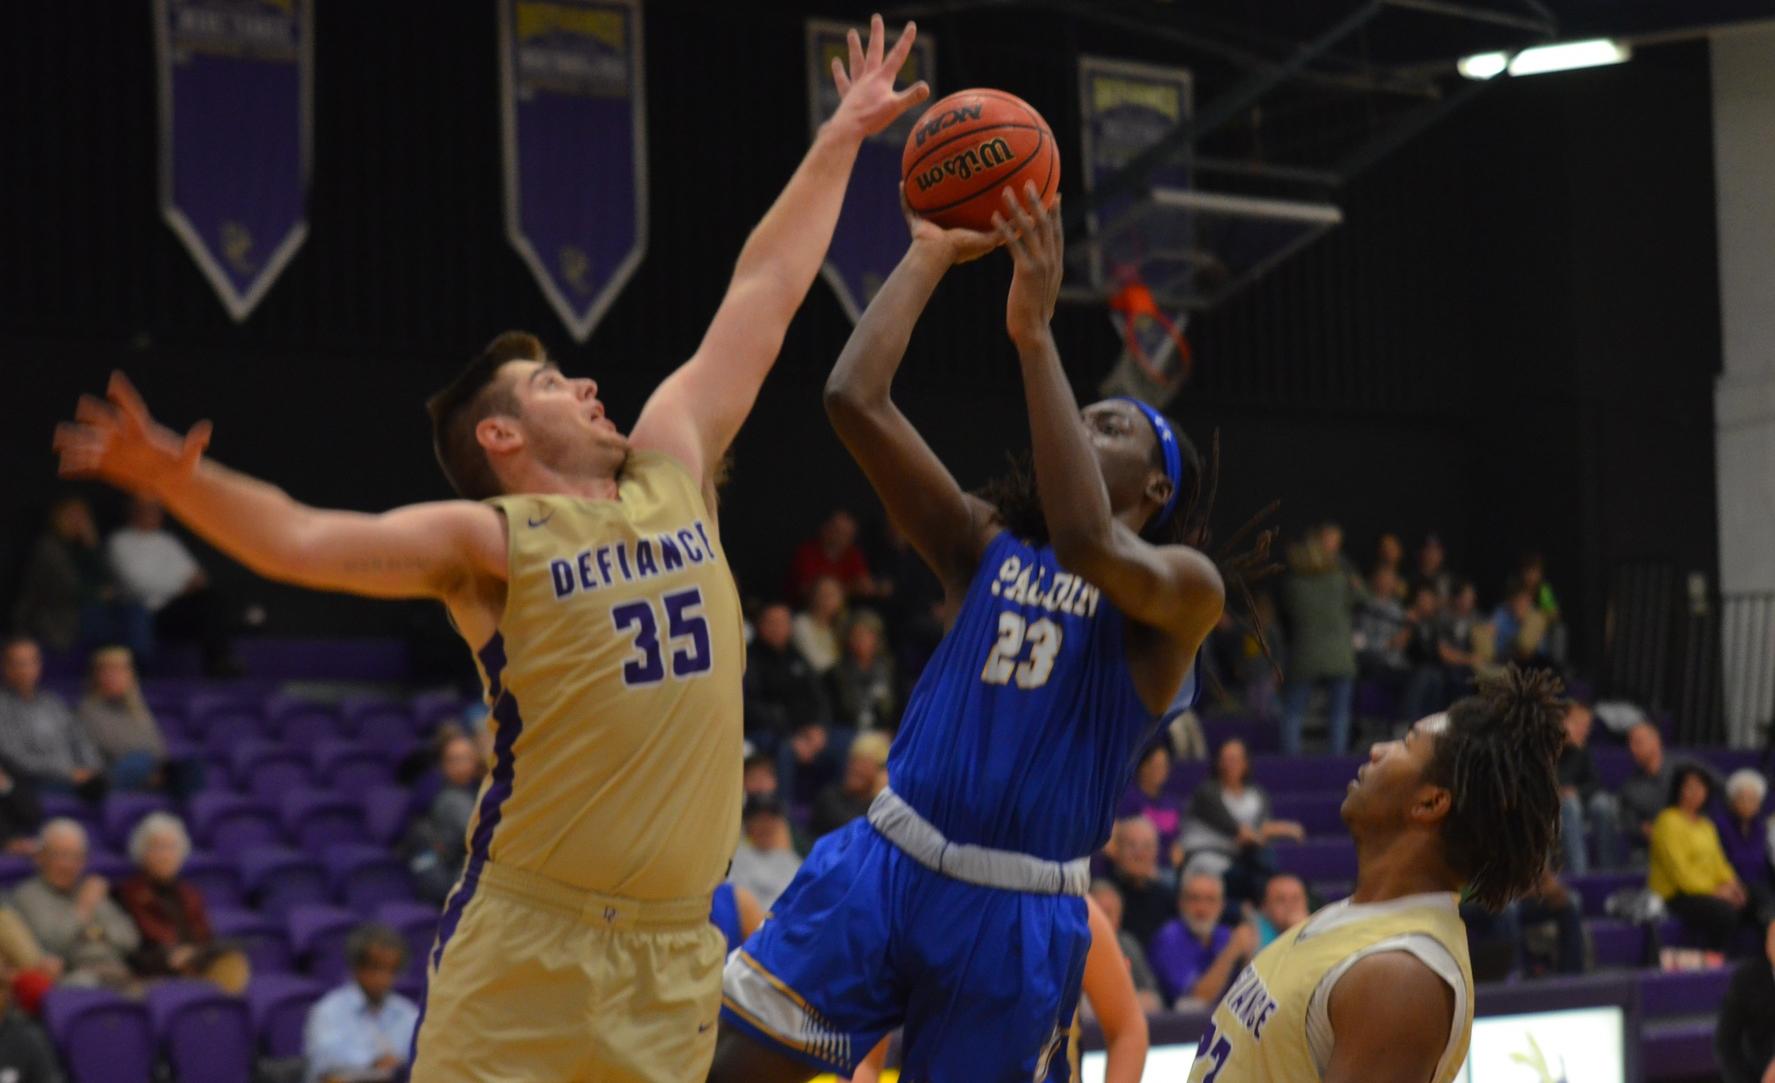 Men’s basketball begins home tournament with lopsided win over Spalding